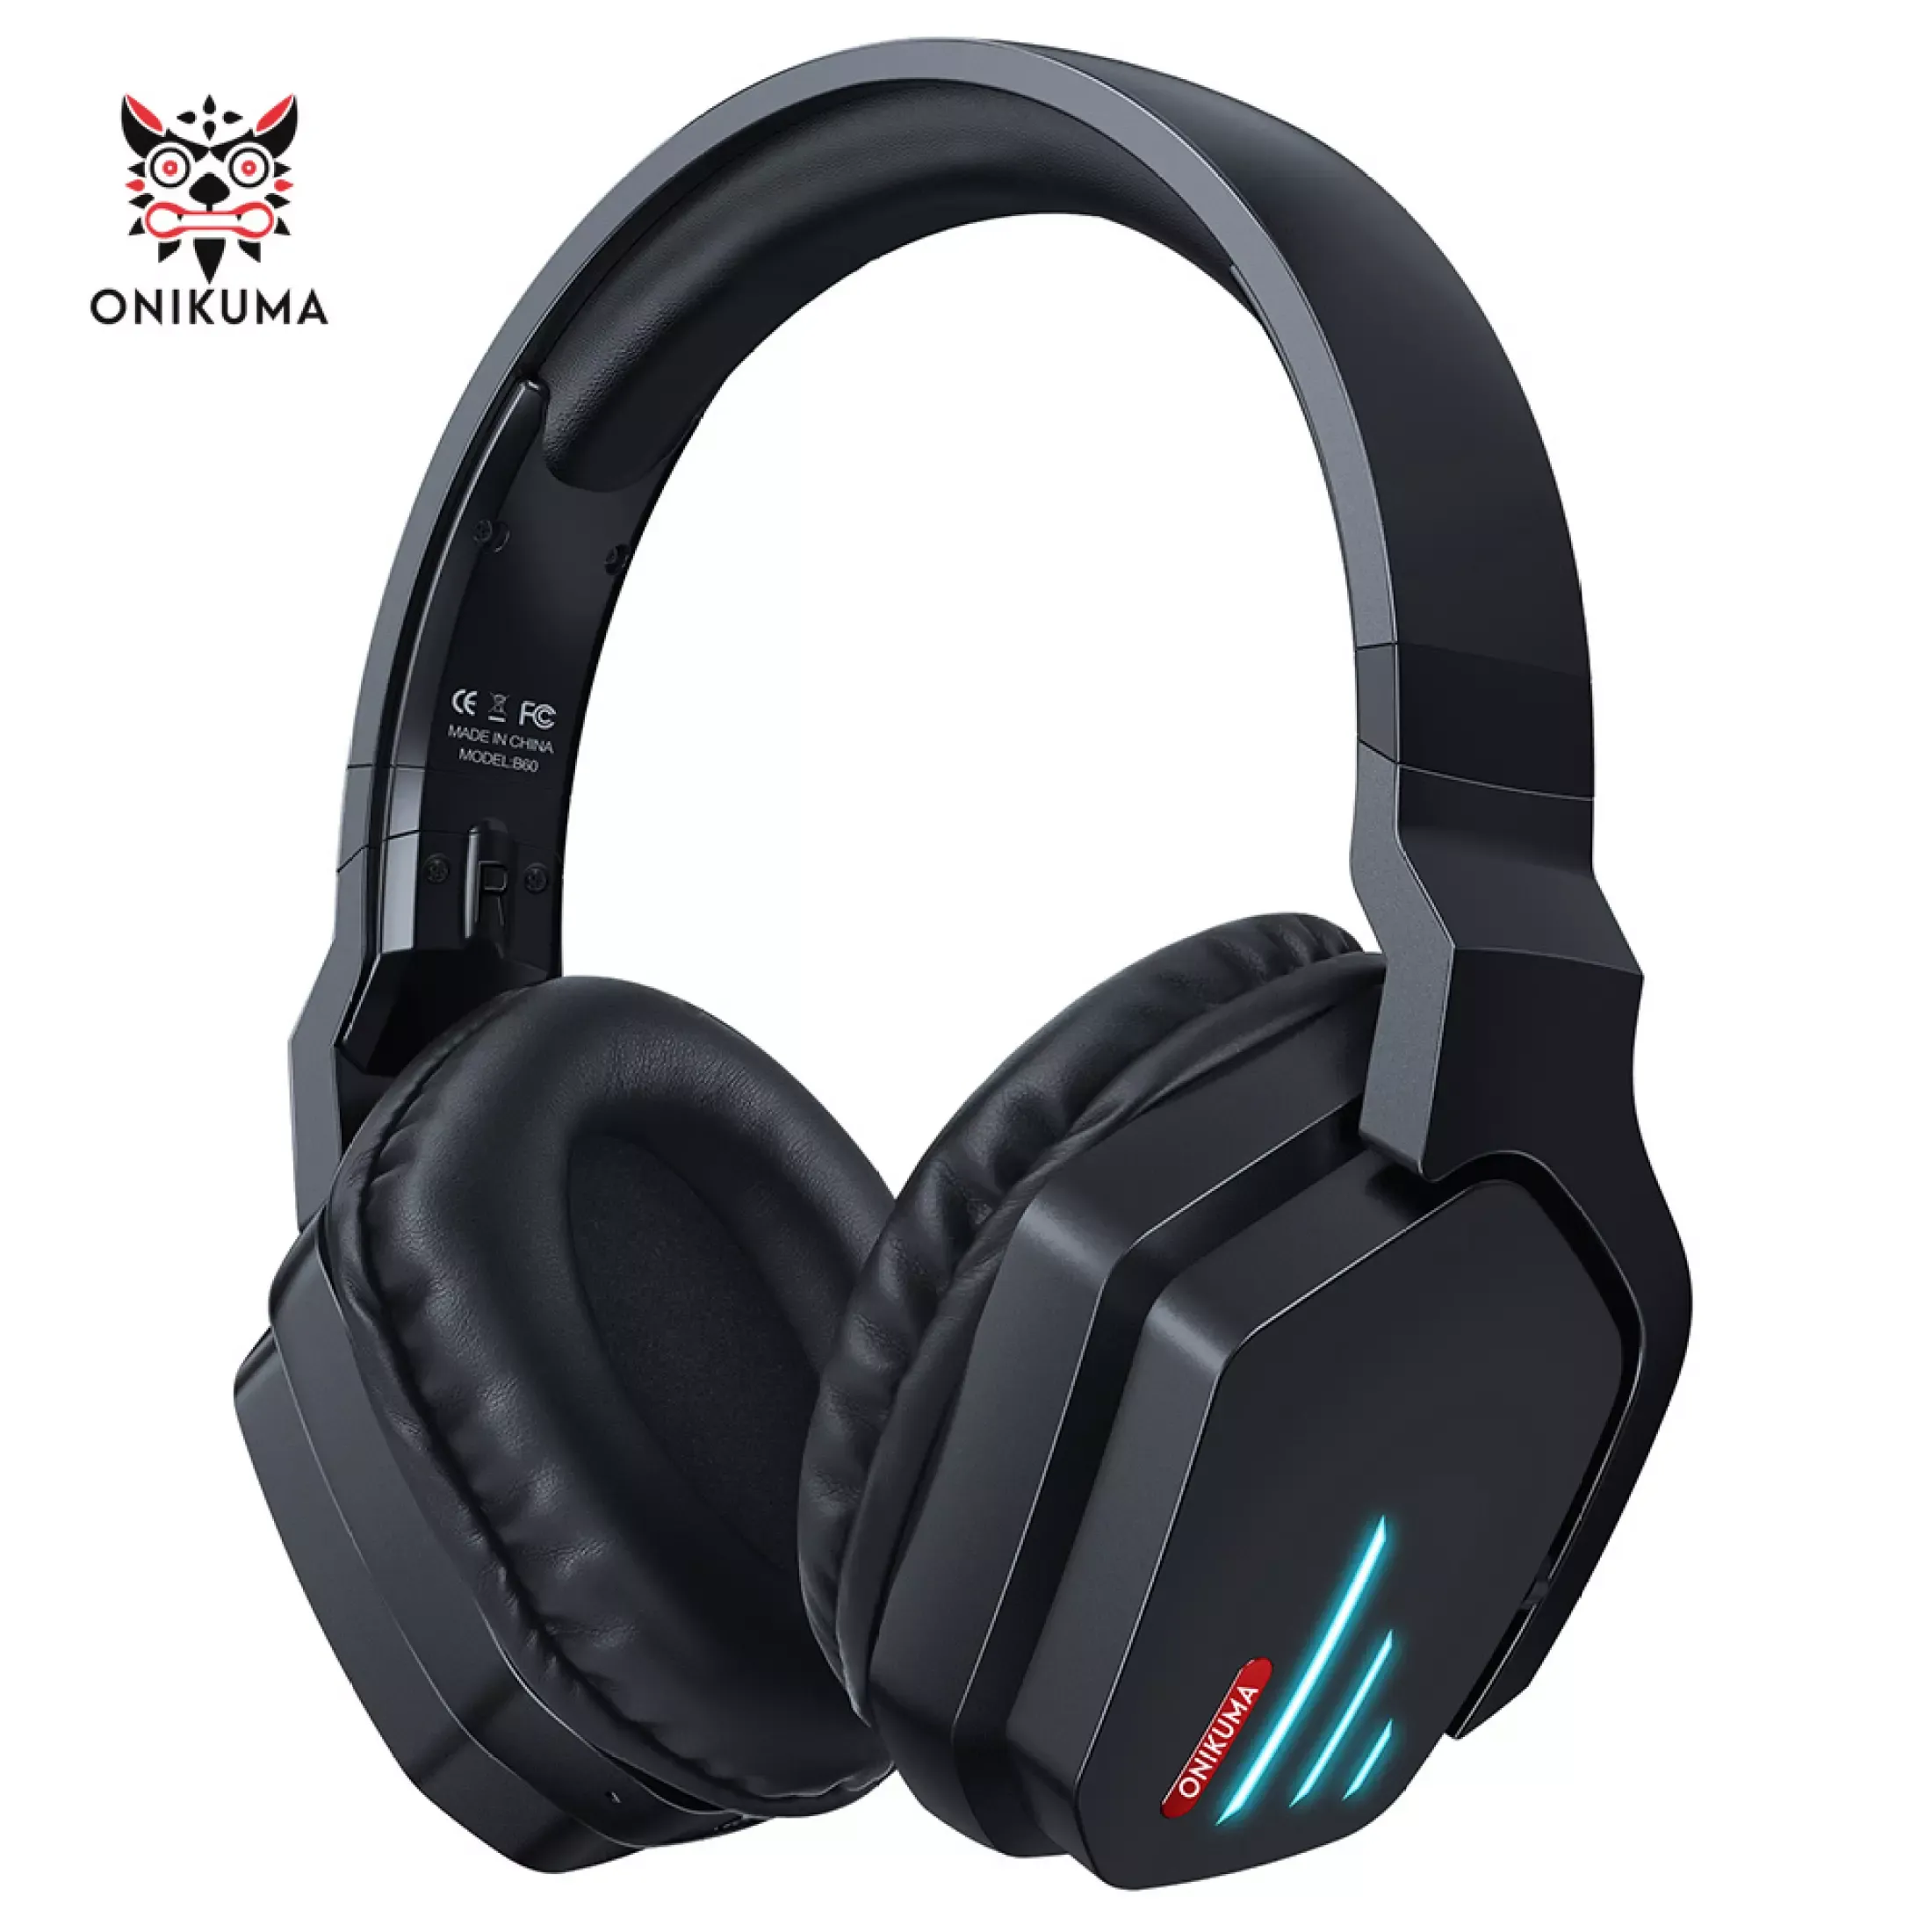 ONIKUMA B60 Bluetooth Headset, Noise Canceling Over-ear with Mic and LED, Surround Sound Stereo Wireless Headset Compatible for PS5, Xbox